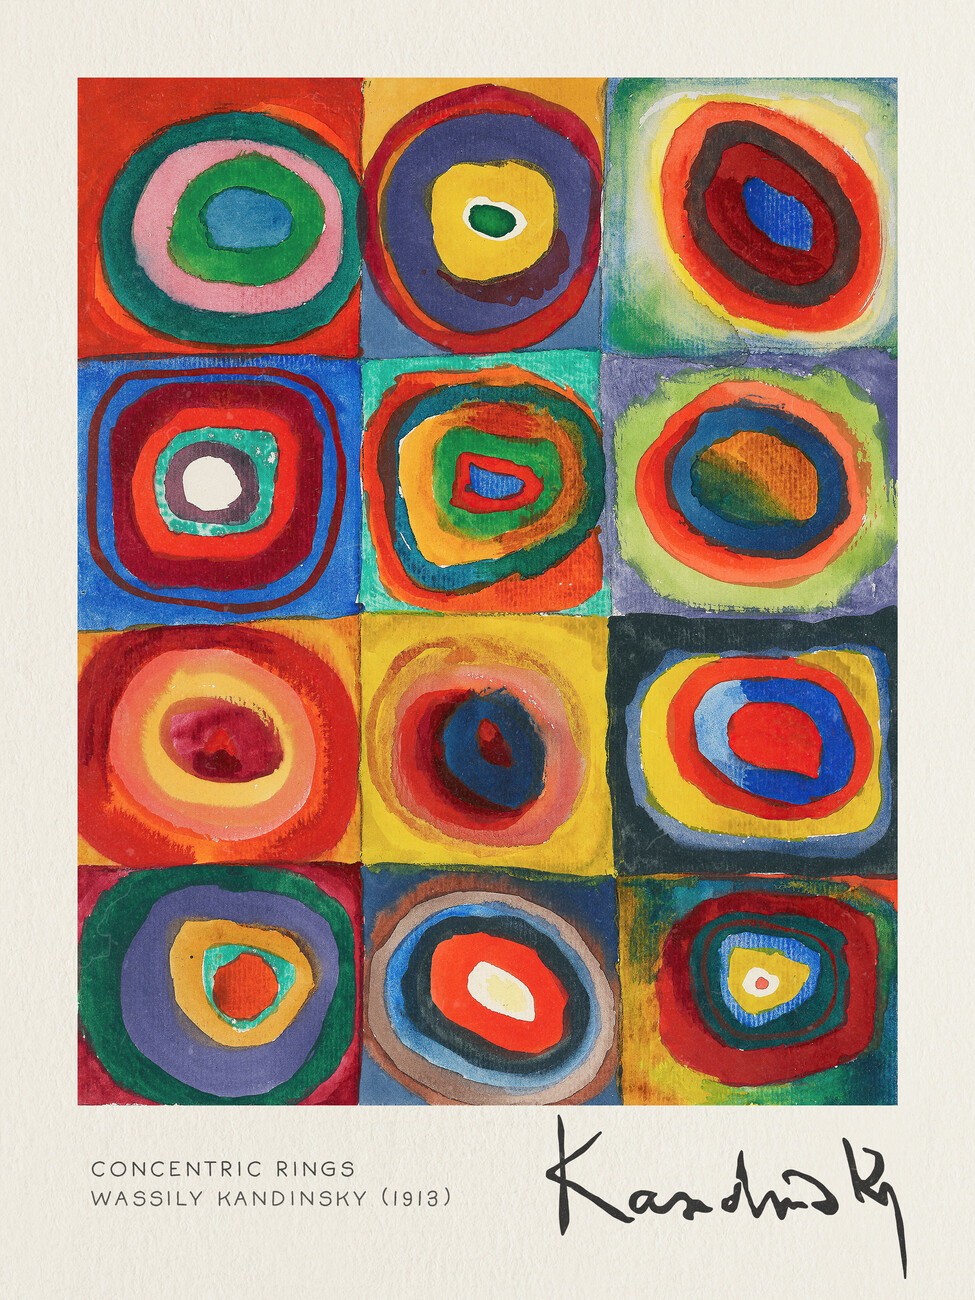 Illustration Concentric Rings - Wassily Kandinsky